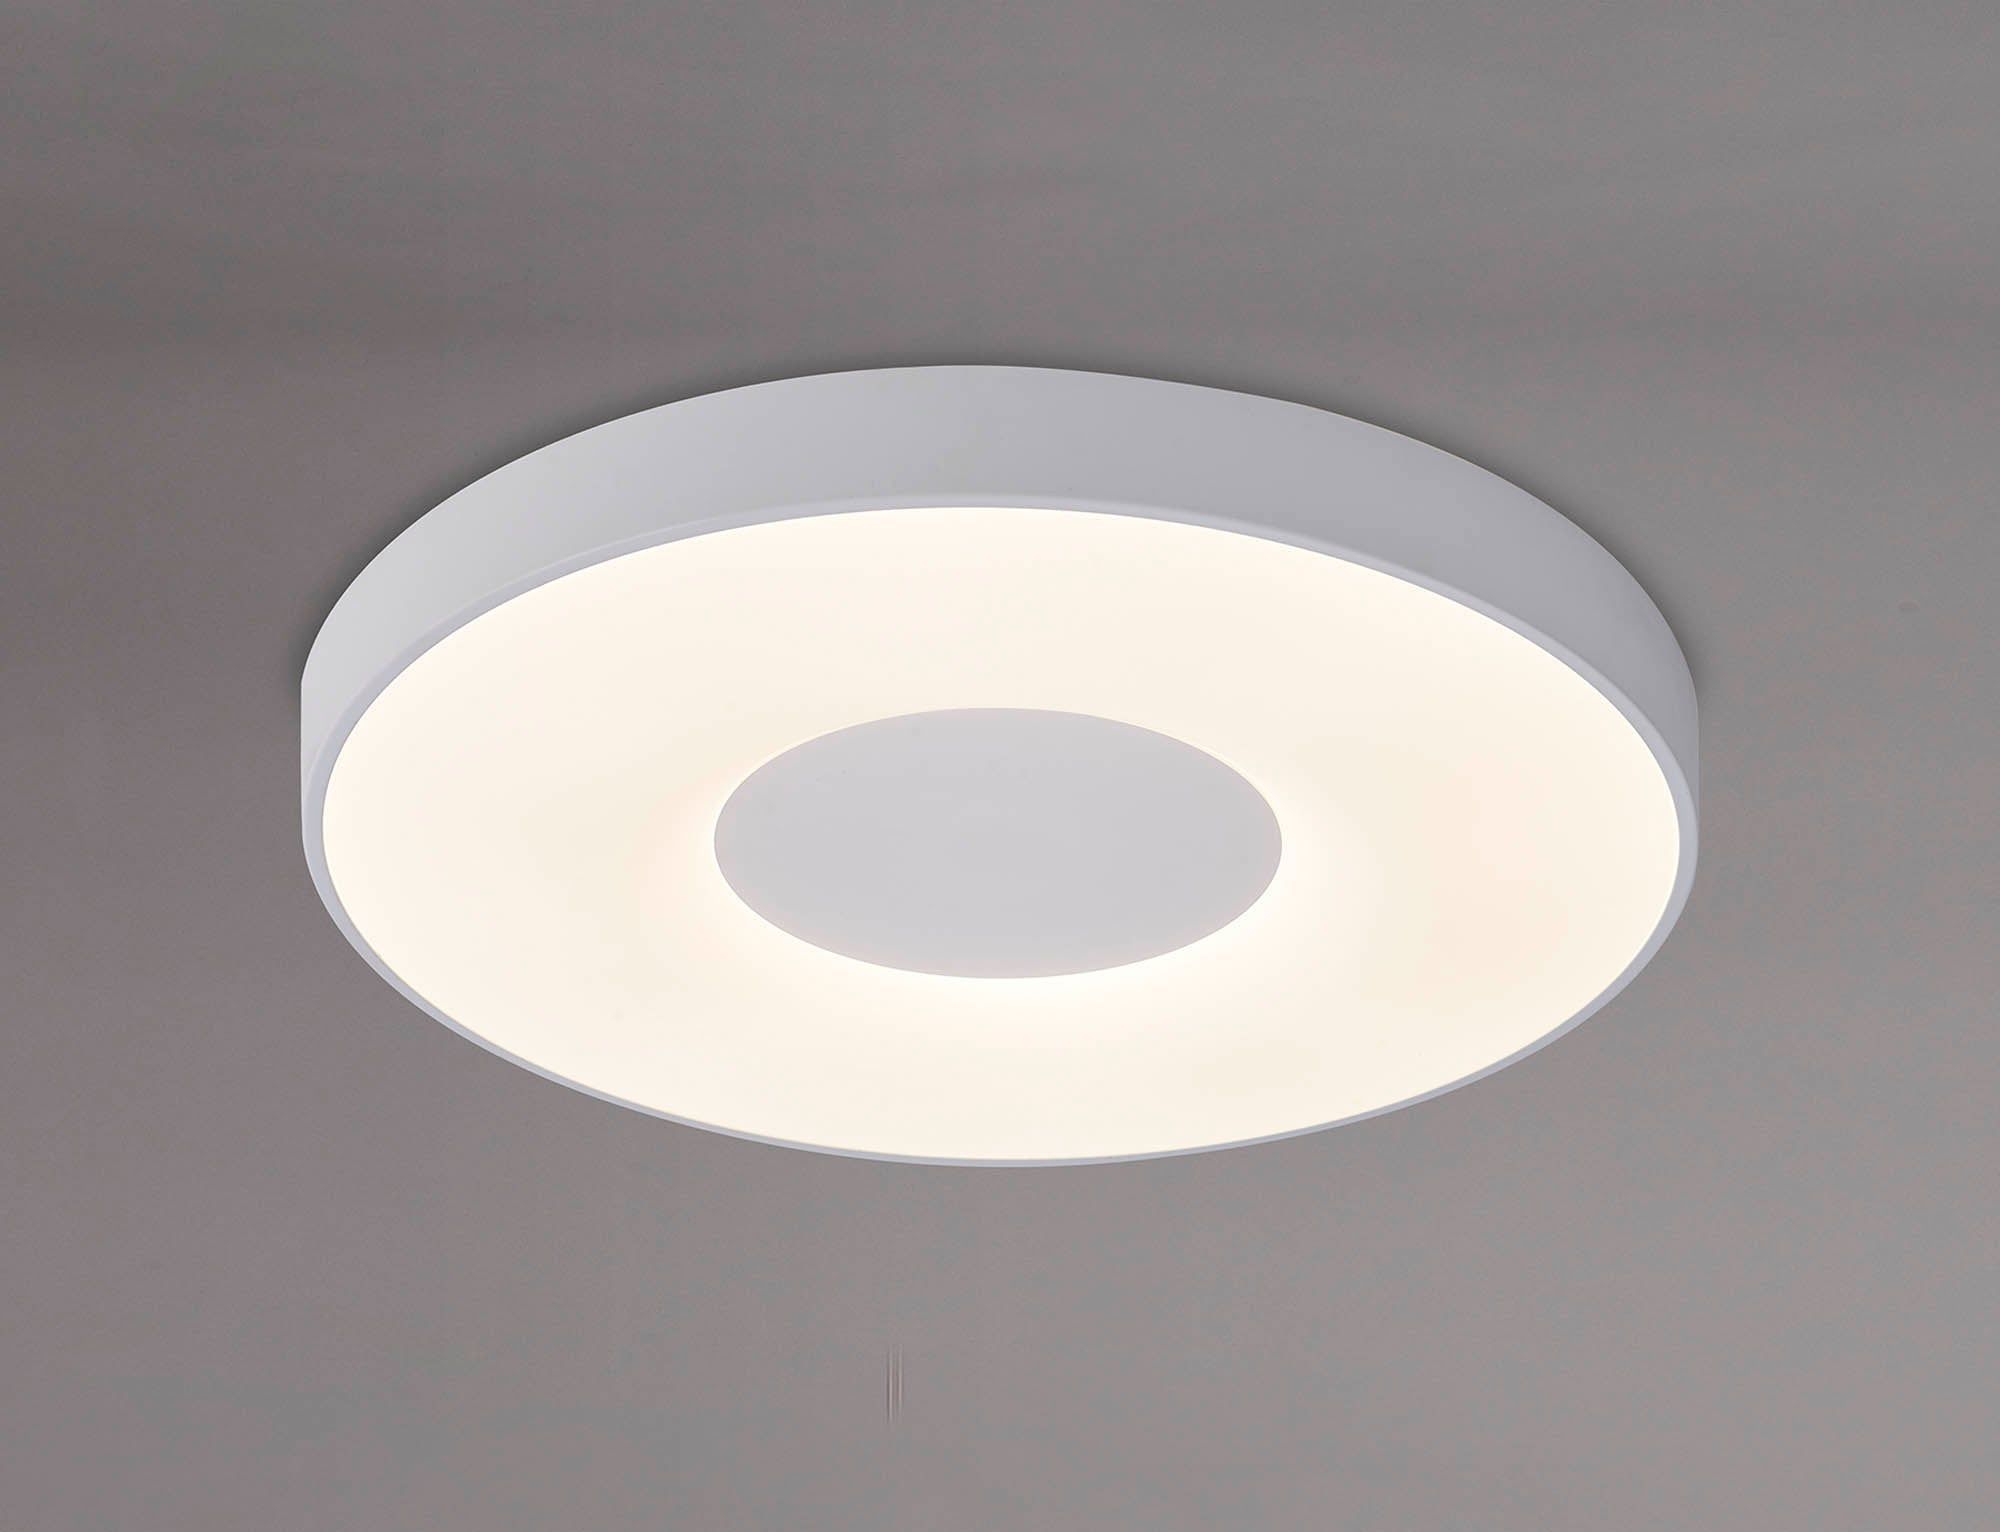 Coin Round Ceiling 100W LED With Remote Control 2700K-5000K, 6000lm, White, 3yrs Warranty